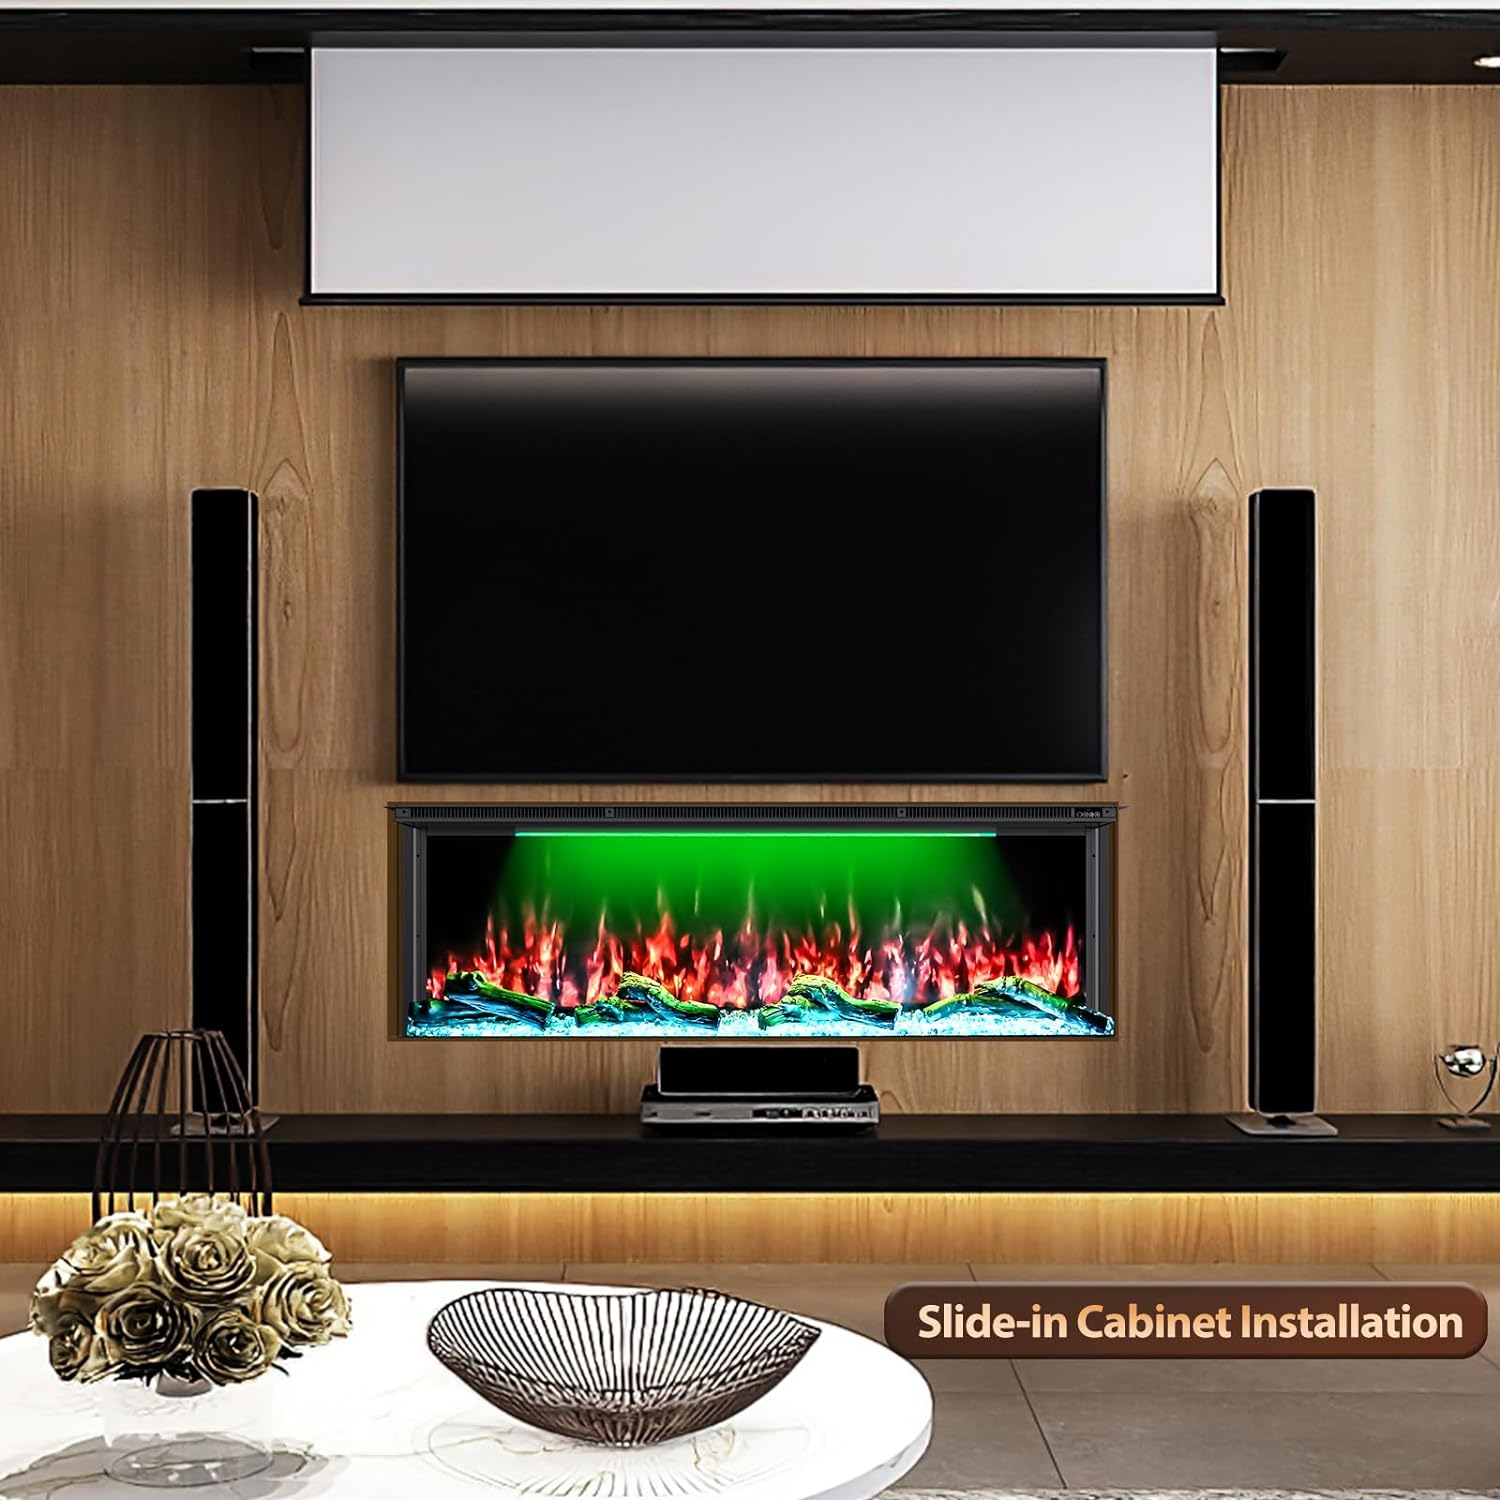 Recessed 3-Sided Electric Fireplace, 50-inch Smart WiFi 251 Flame Colors Combination Inserts Eletric Fire Place Heater for Living Room Indoor Use with Remote Control, Log & Crystals, Black